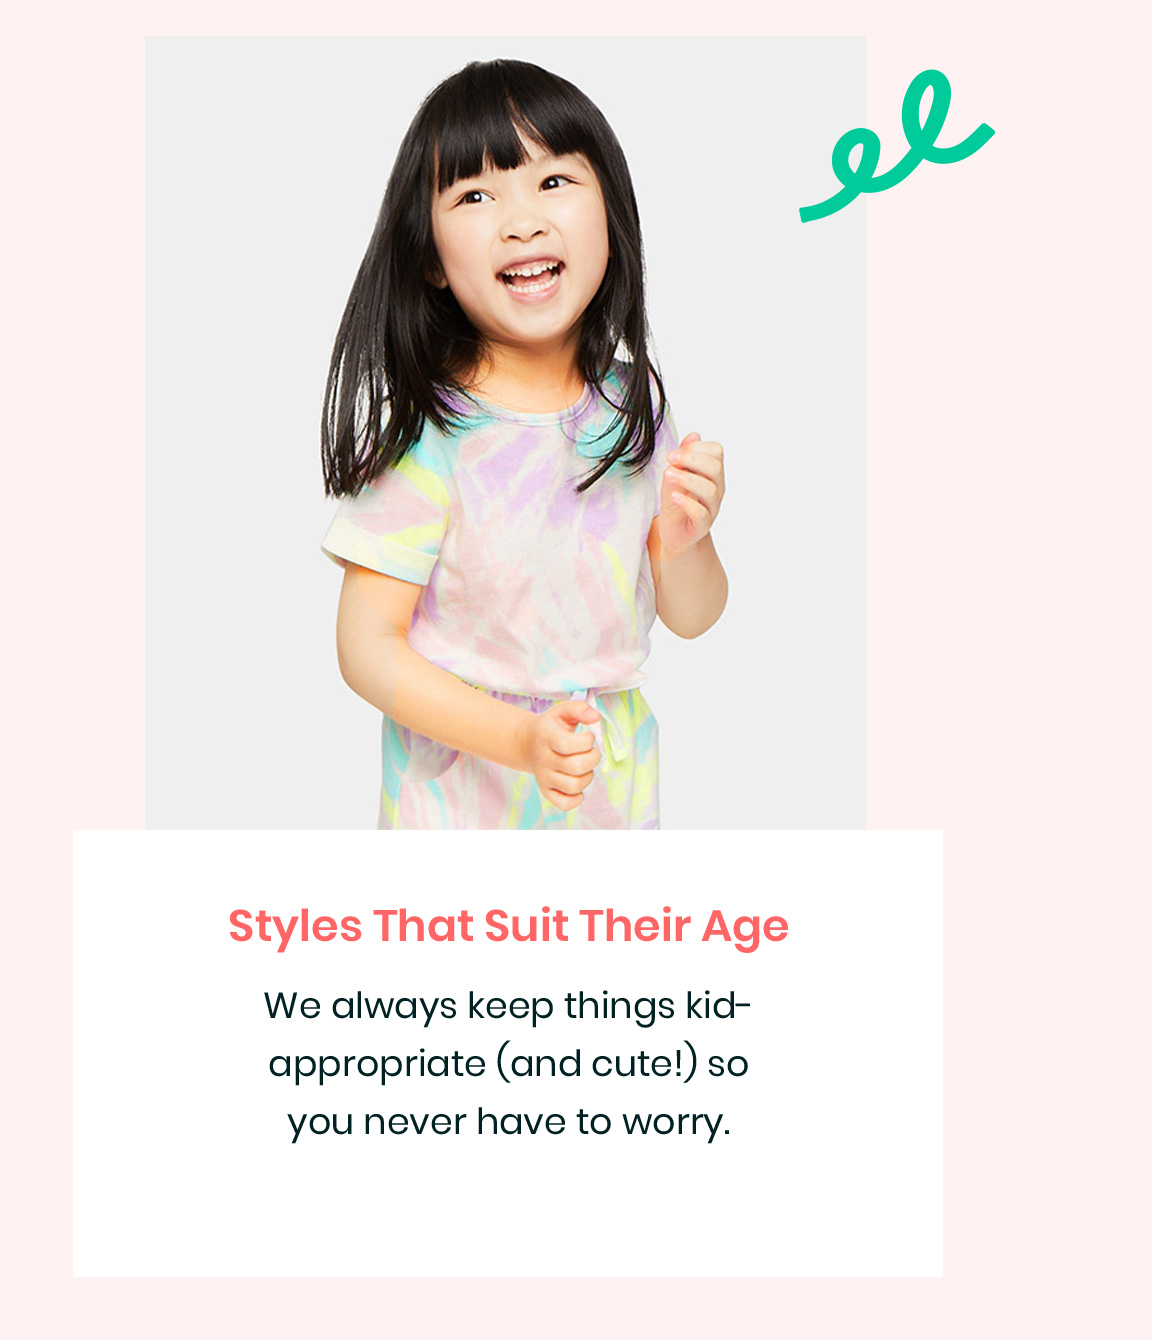 Styles That Suit Their Age - We always keep things kid-appropriate (and cute!) so you never have to worry.